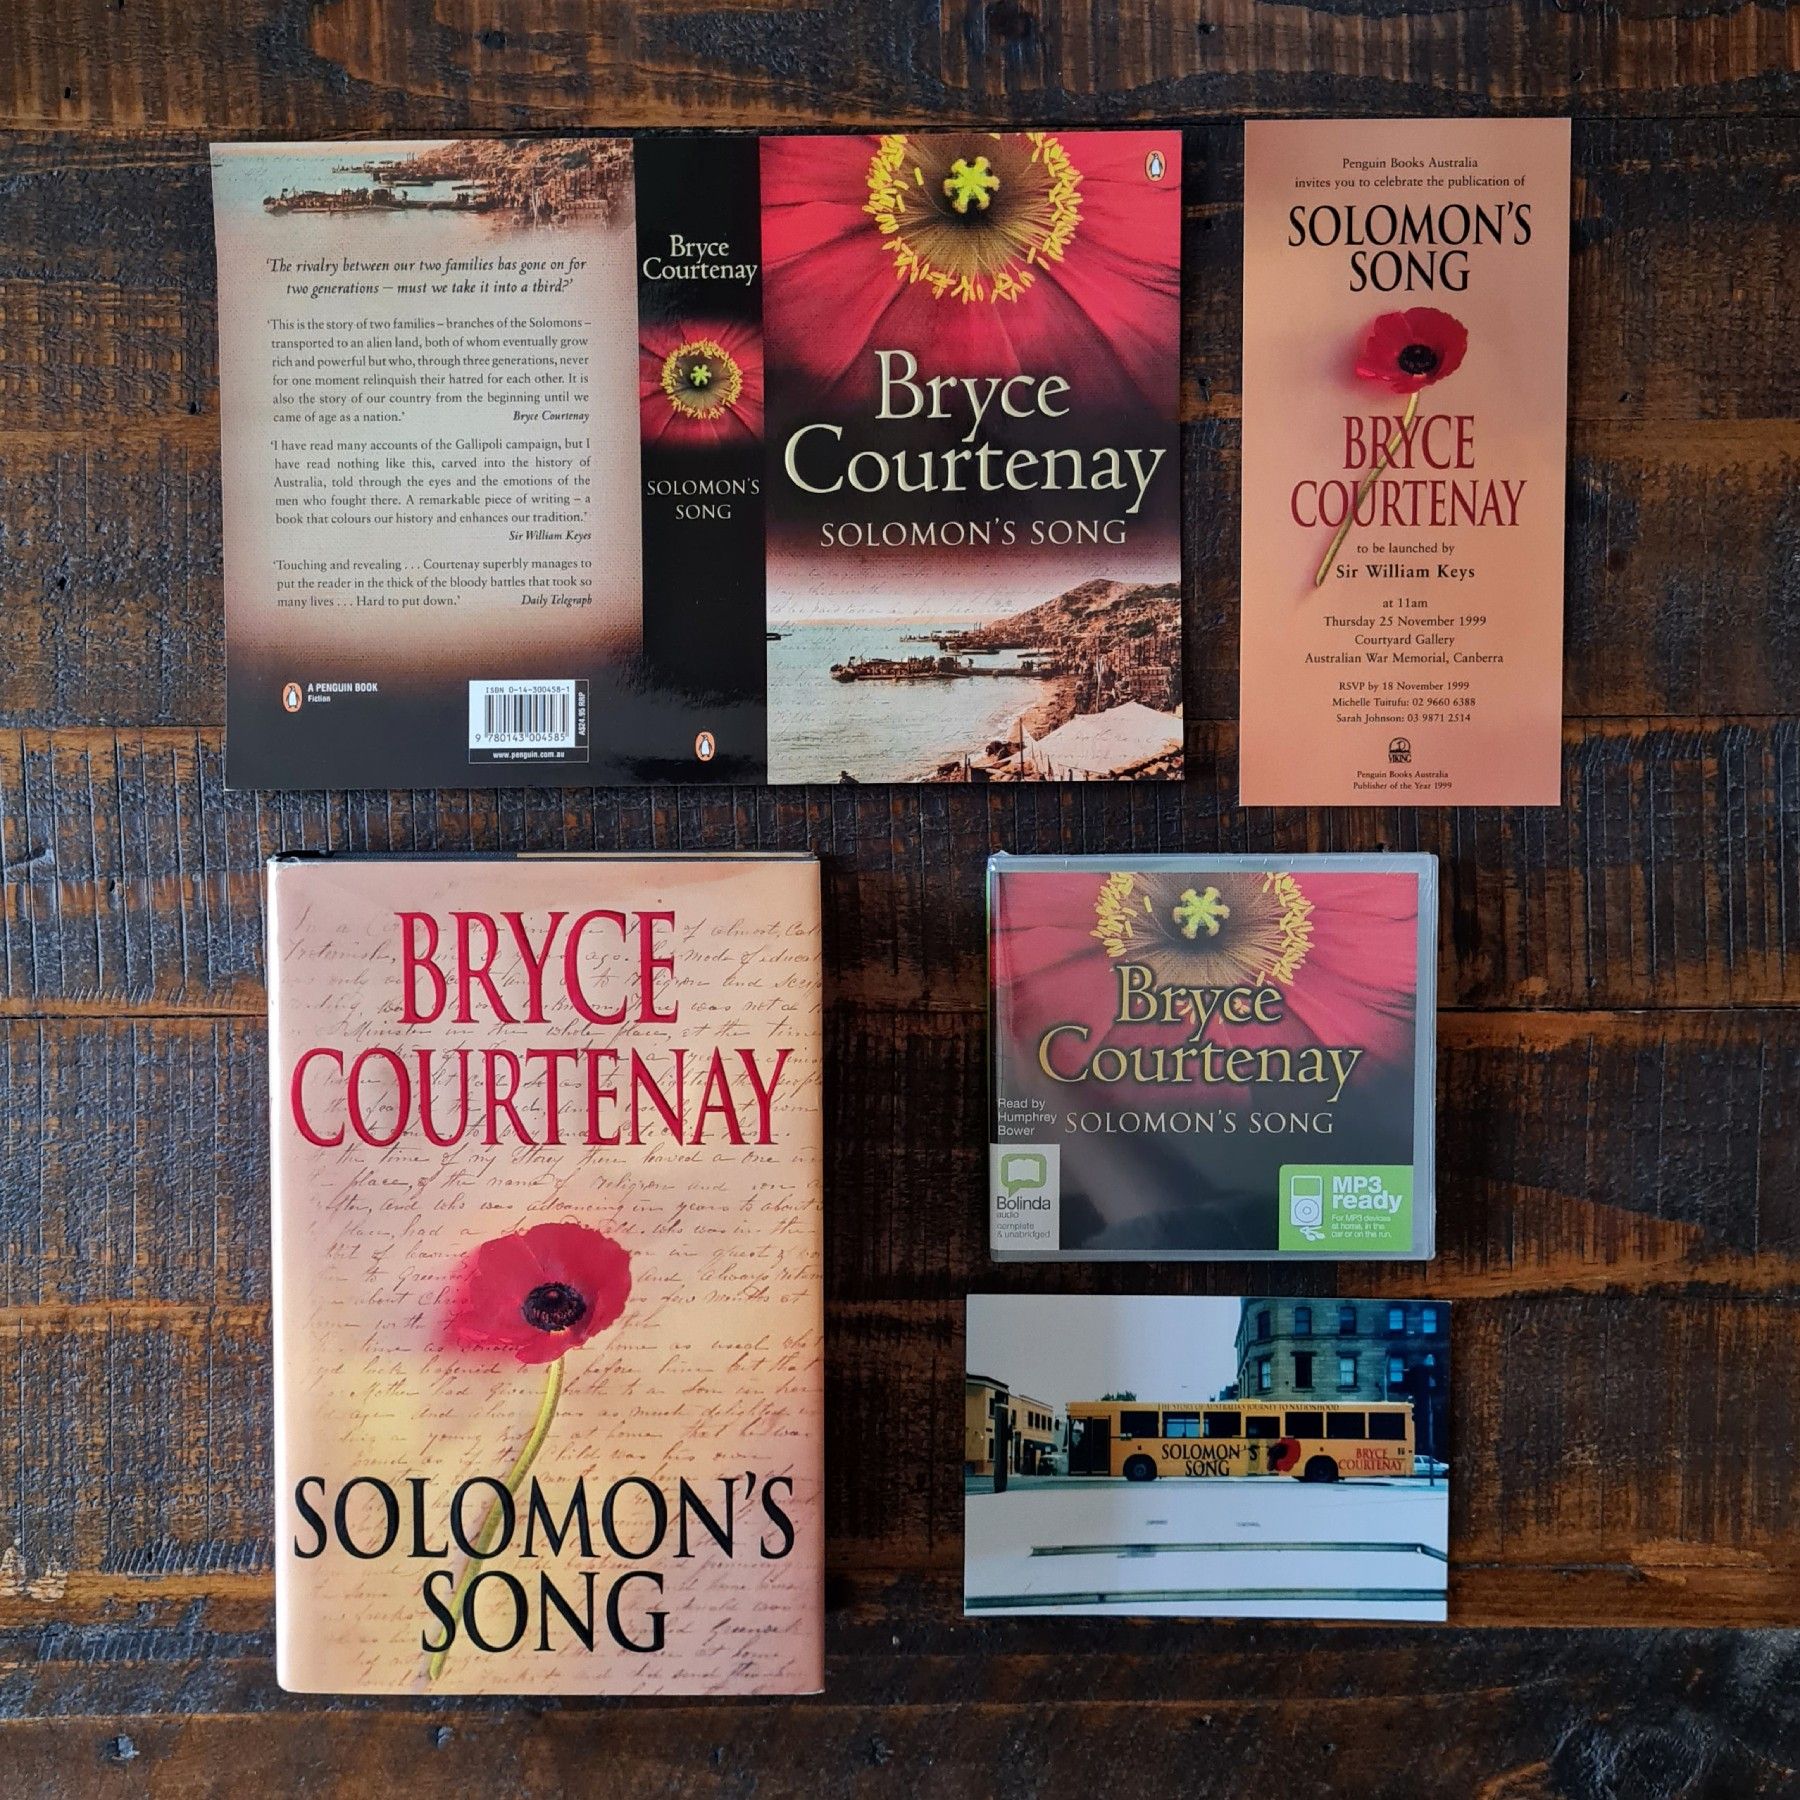 Solomon’s Song trilogy - Bryce Courtenay